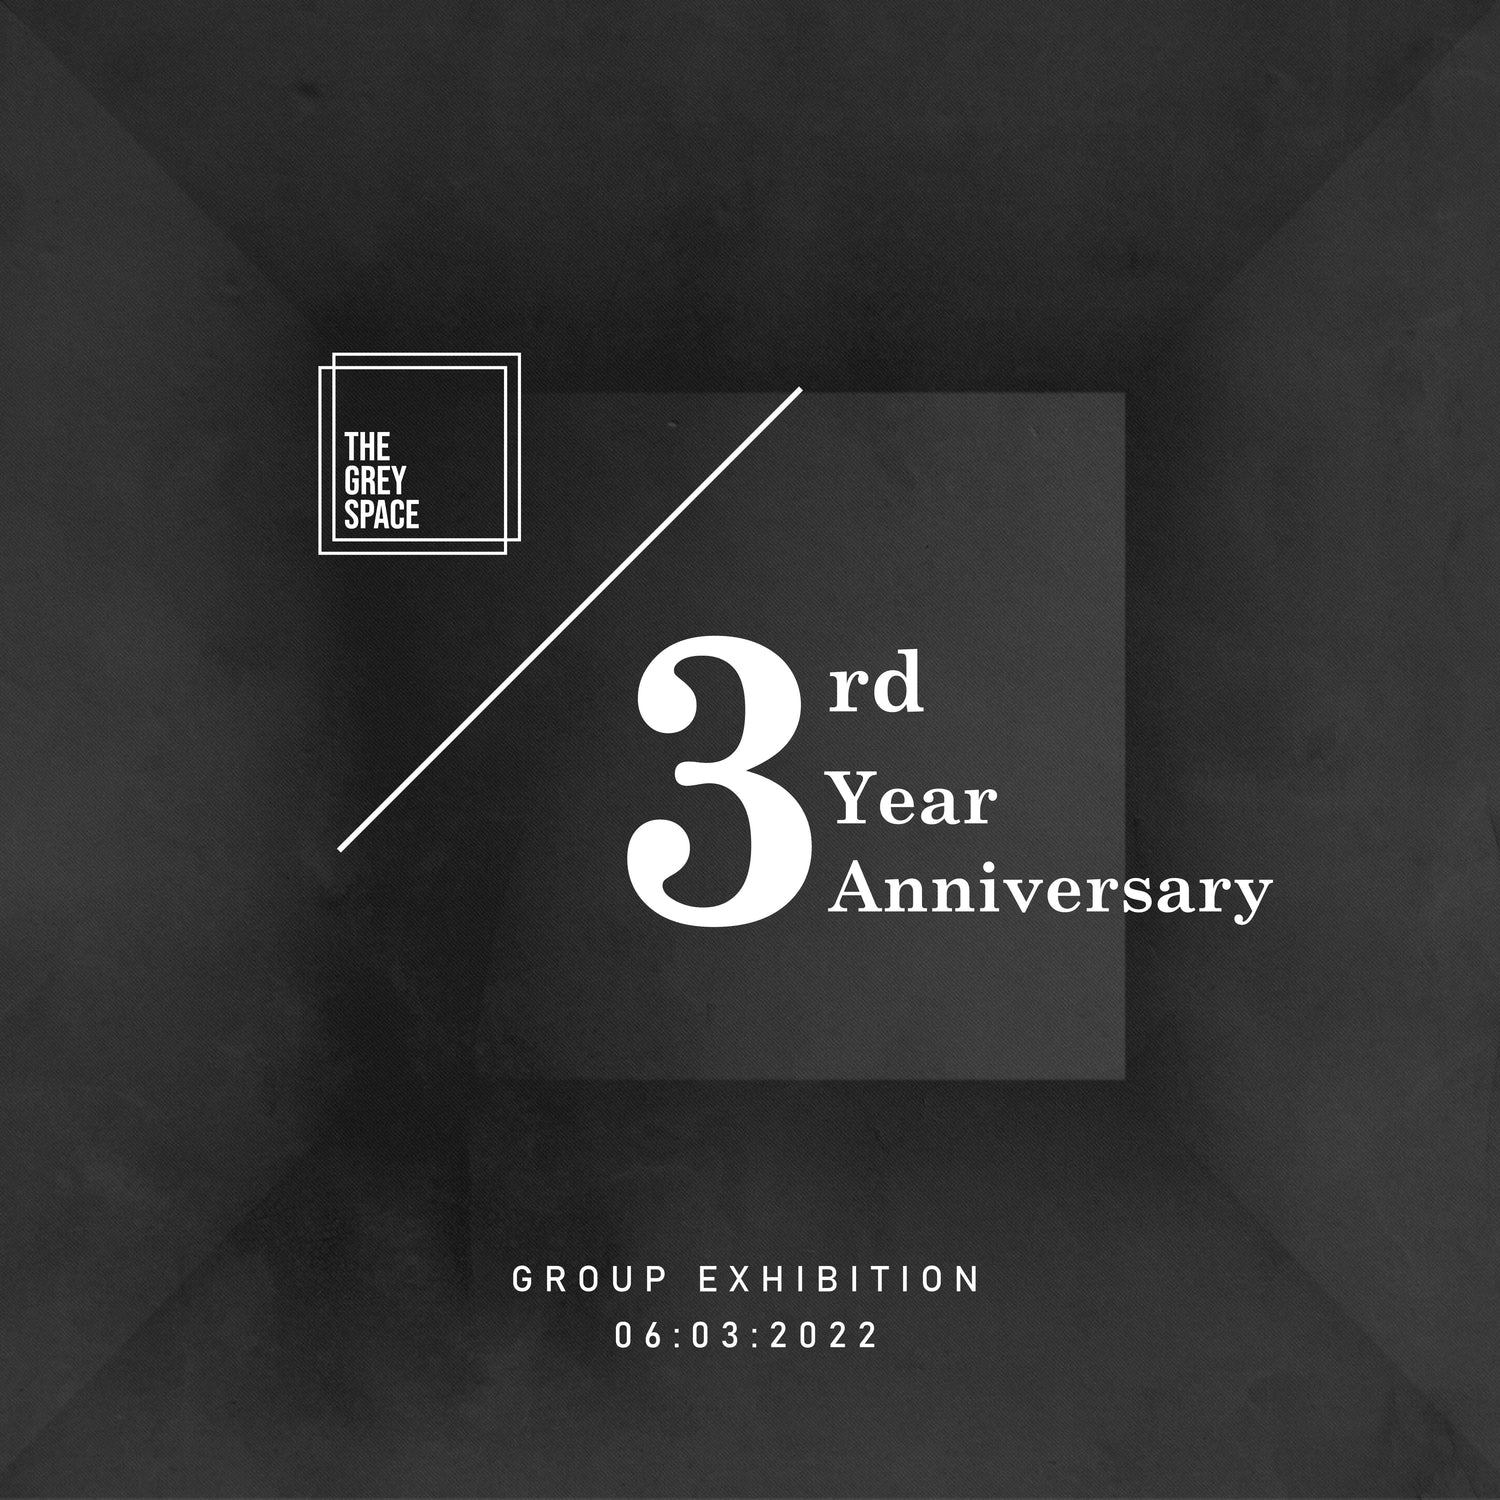 The Grey Space 3rd Year Anniversary